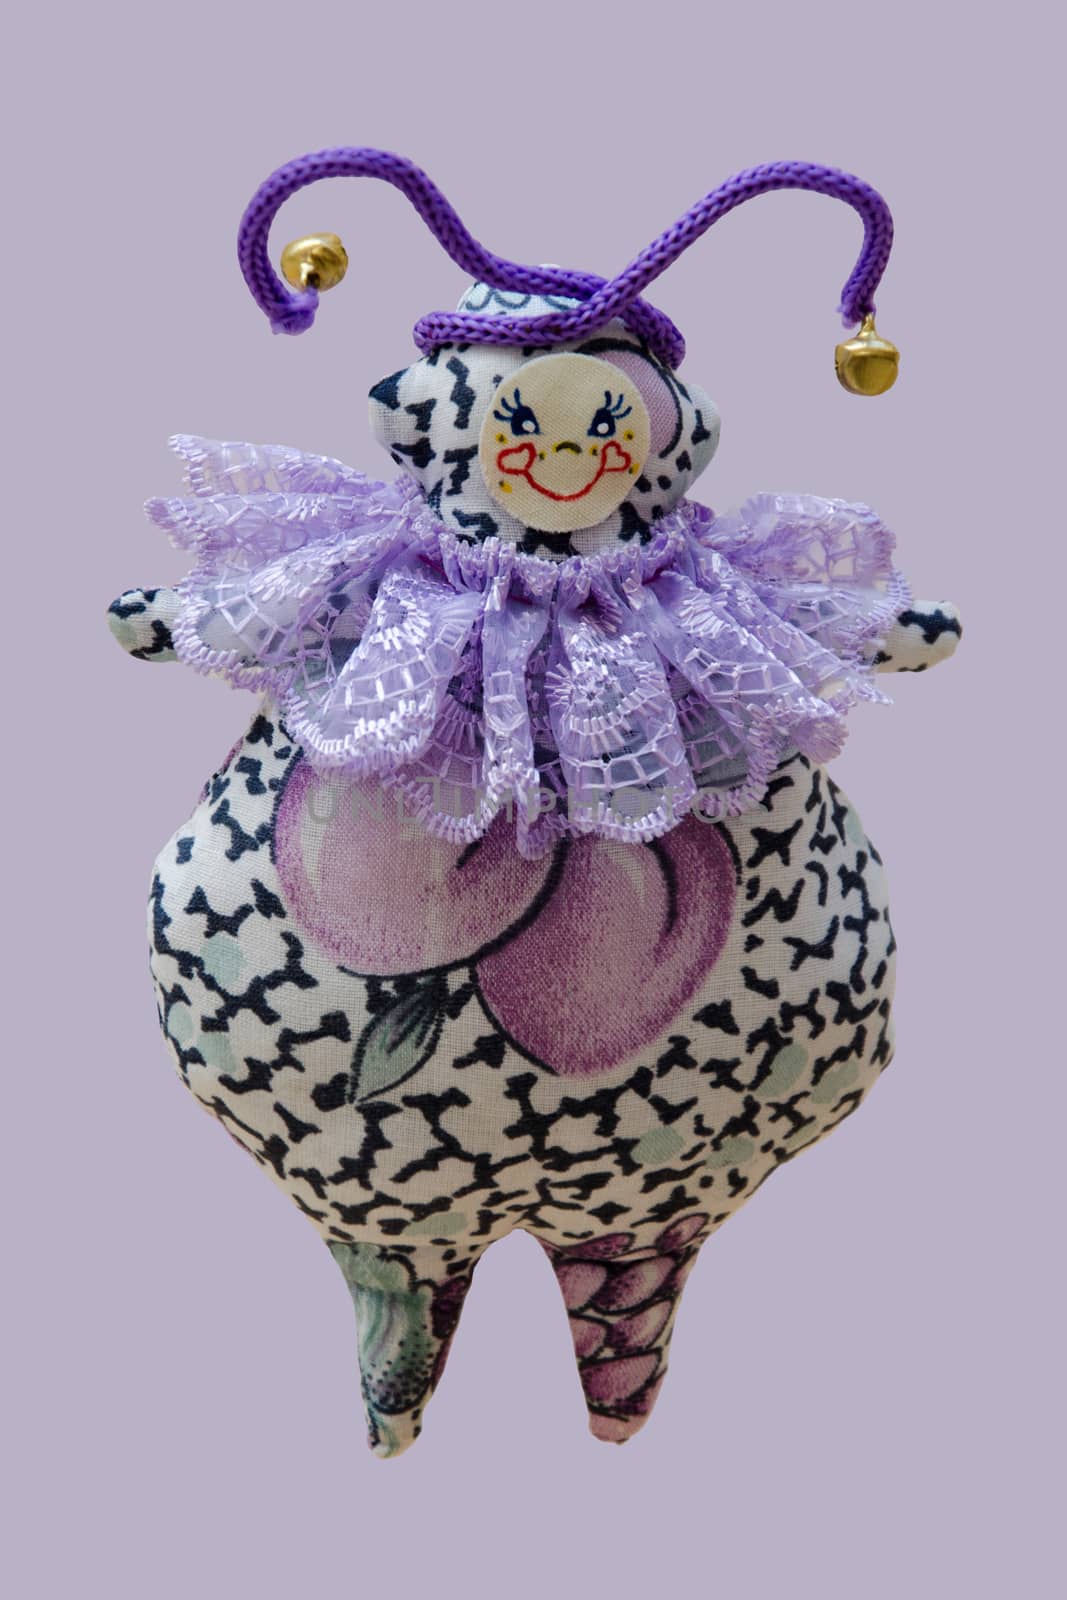 The Hand made soft toy doll isolated on purple background